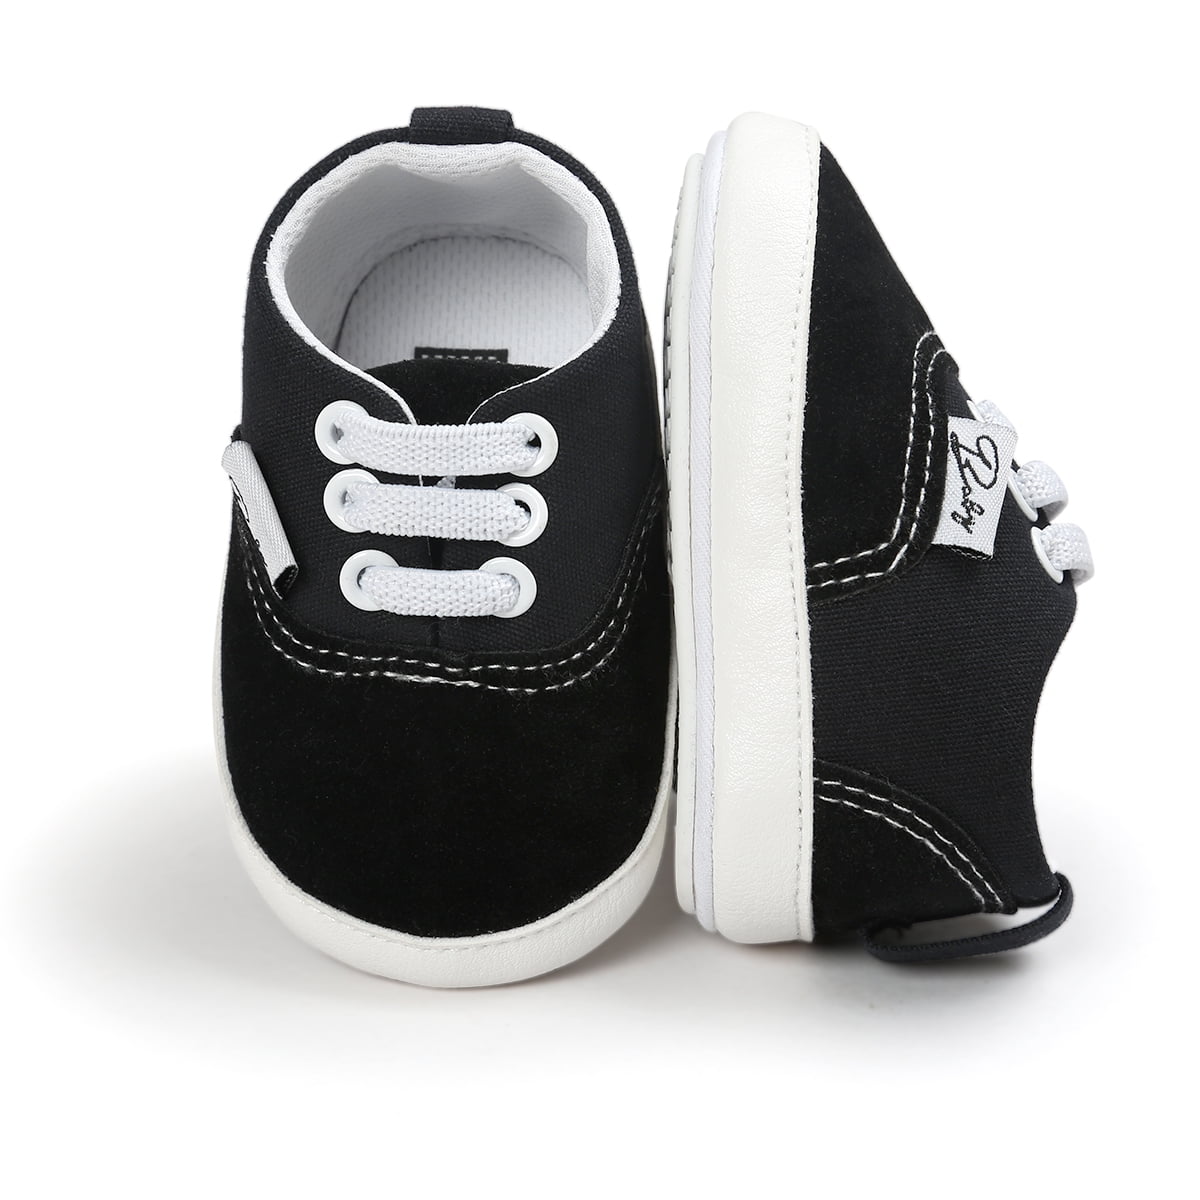 HsdsBebe Baby Girls Boys Canvas Shoes Infant Casual Sneakers Soft Sole ...